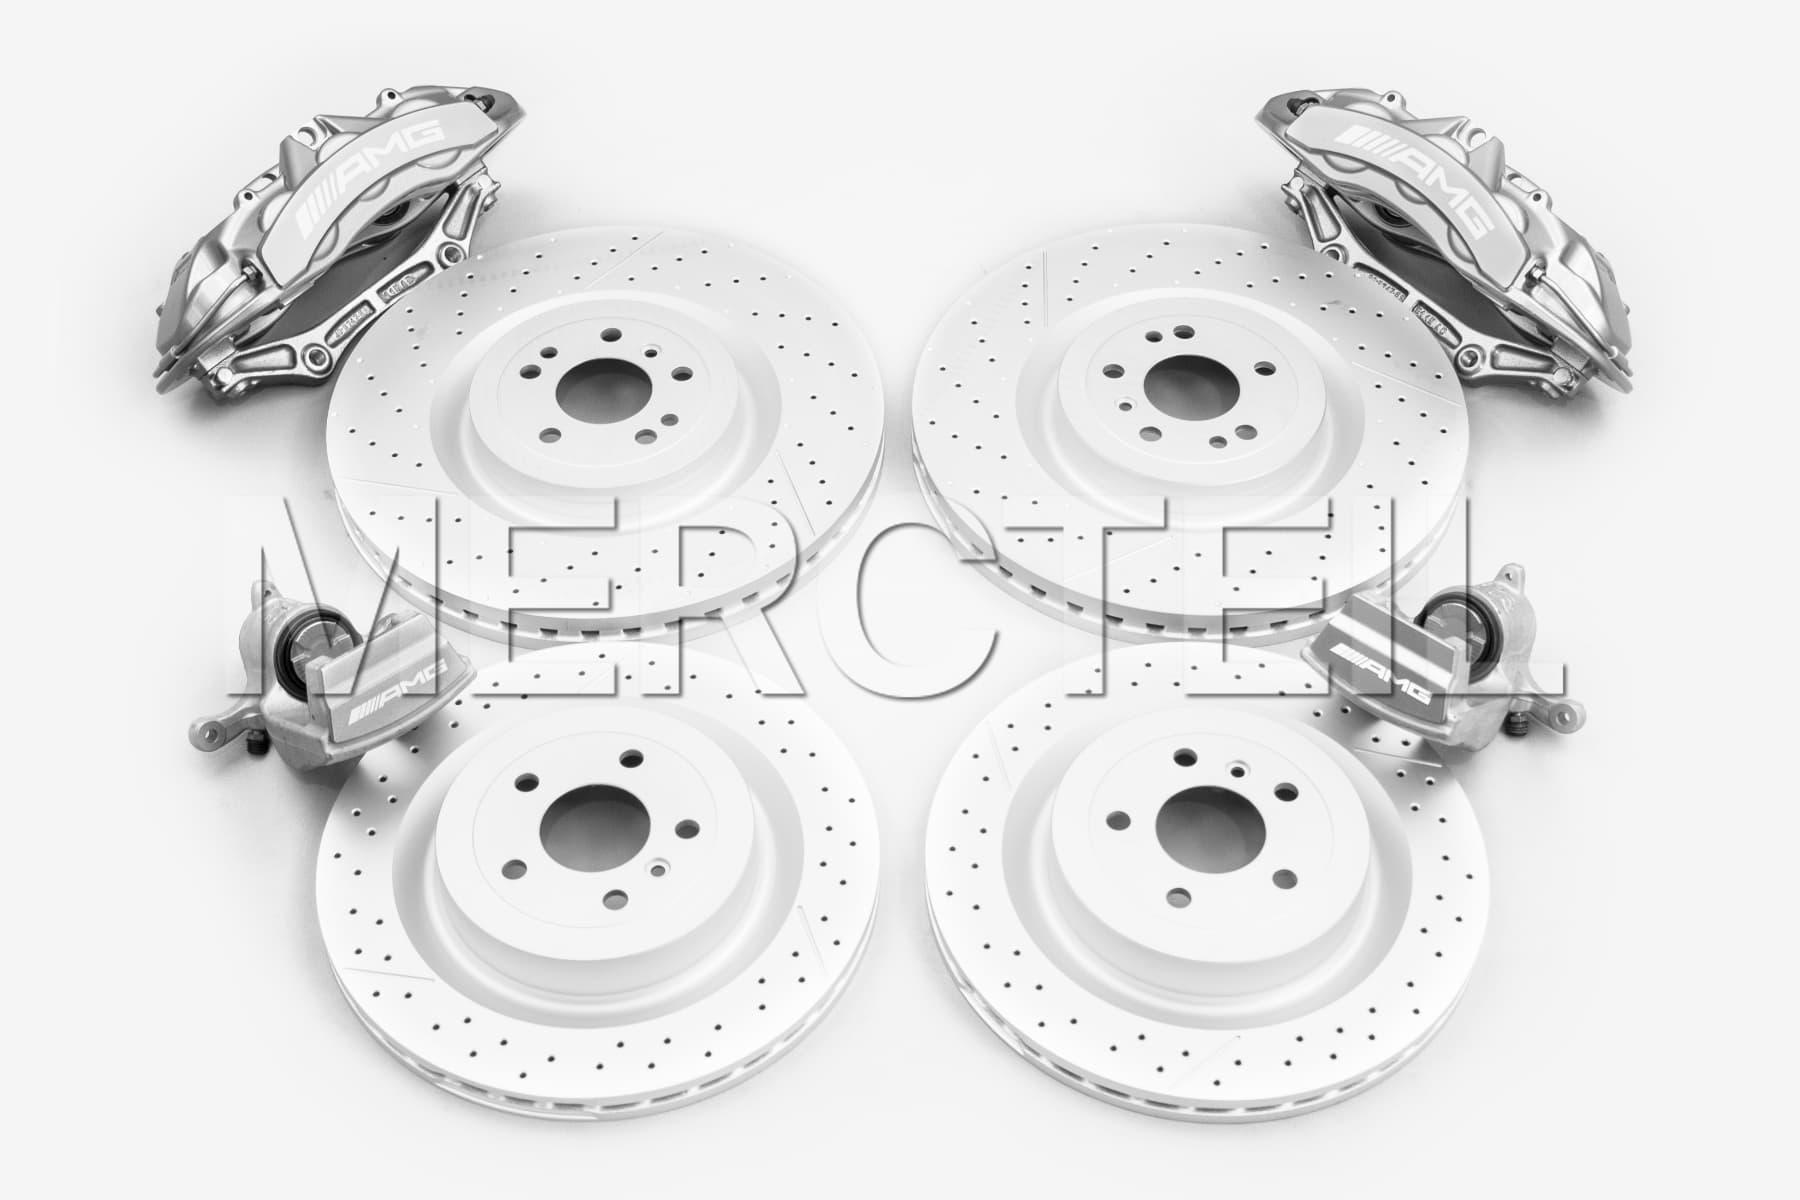 AMG Gray Performance Brake System Genuine Mercedes AMG (part number: A0004207800)